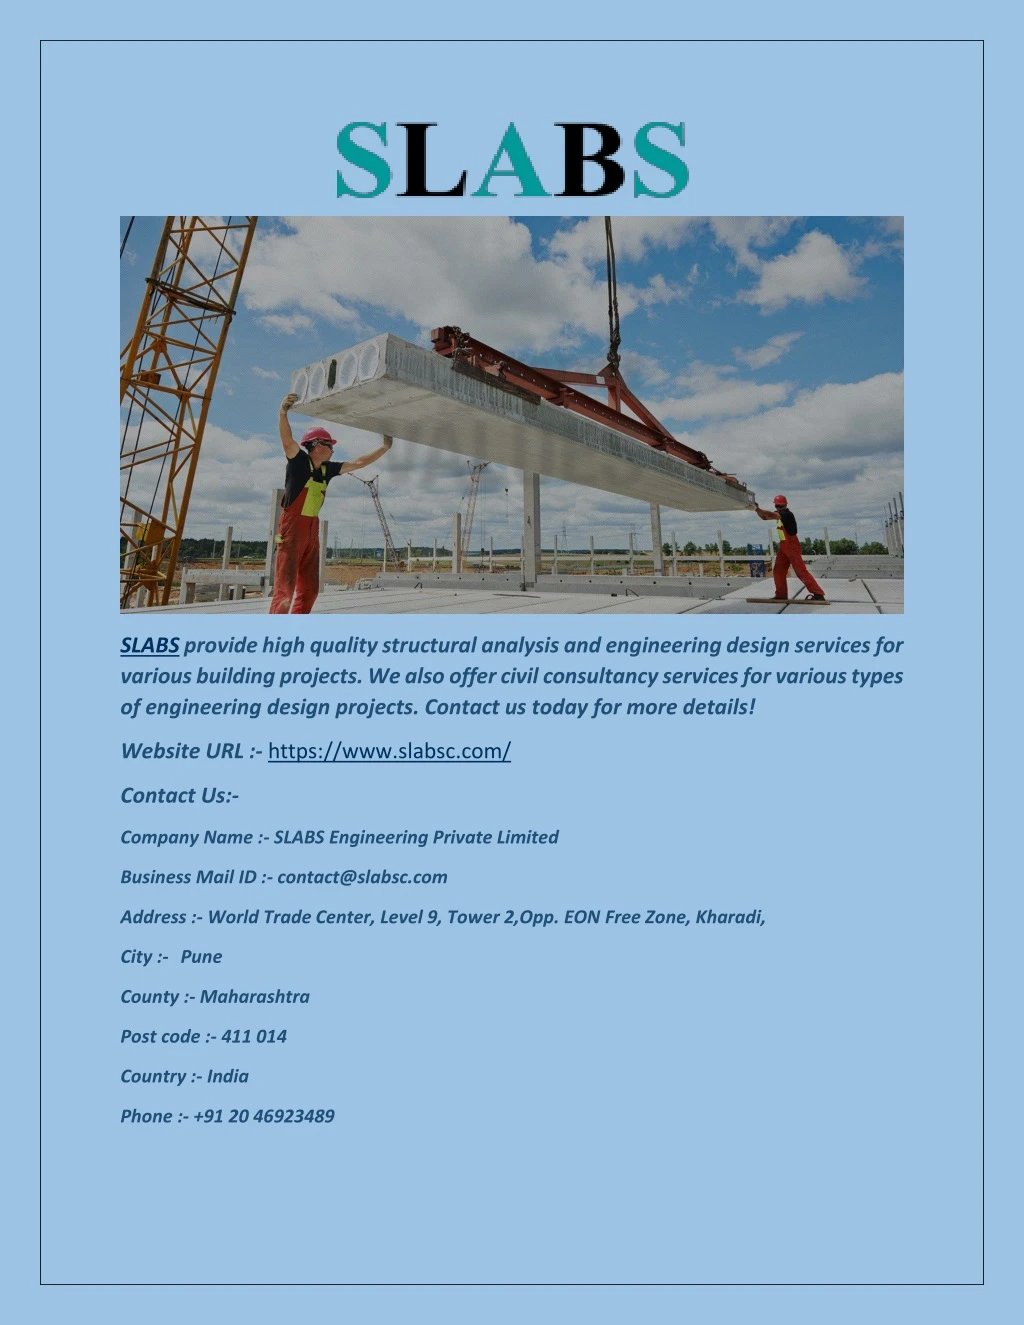 slabs provide high quality structural analysis